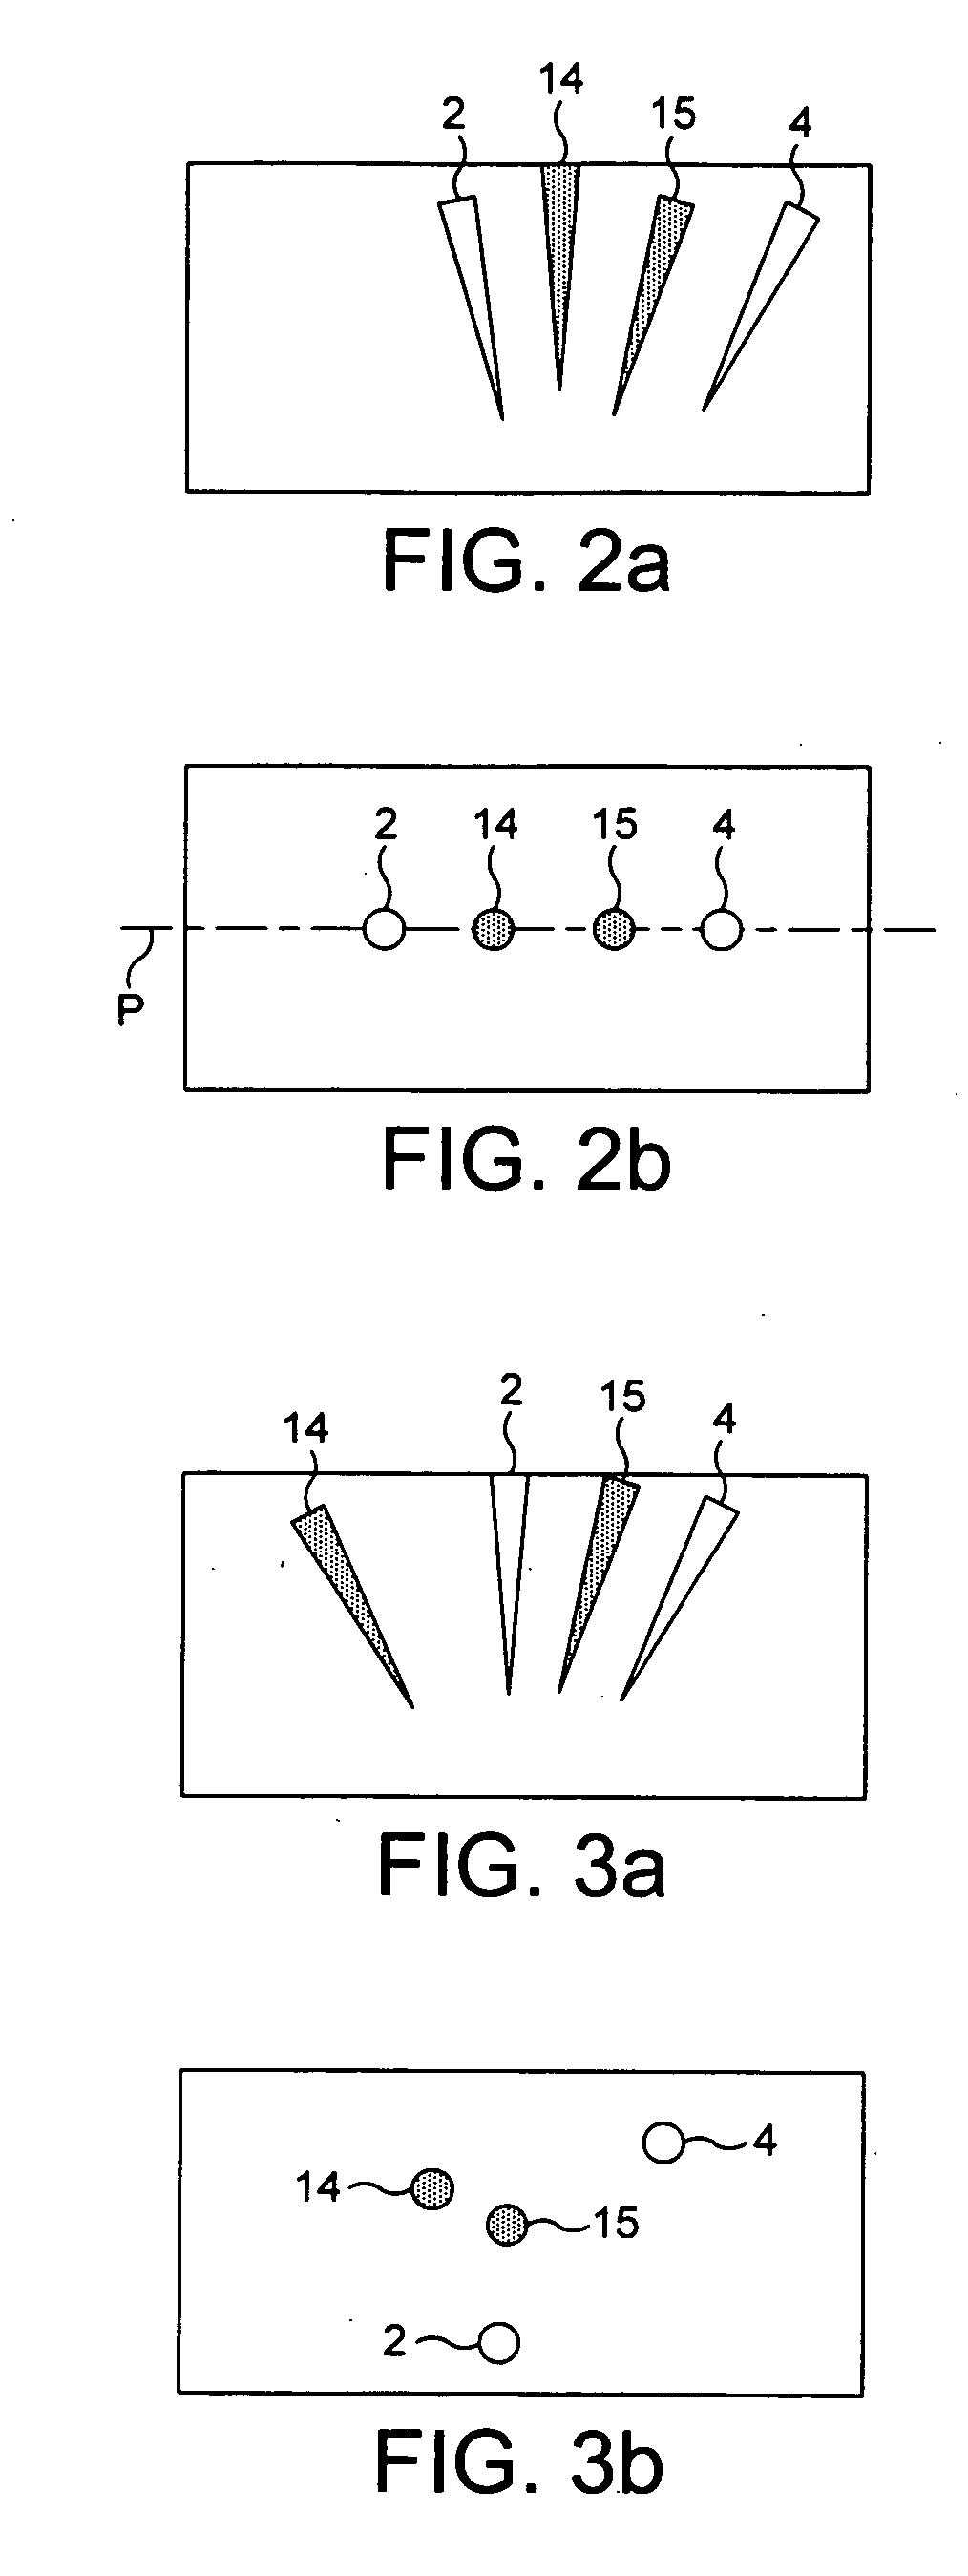 Method and system for in-cup dispensing, mixing and foaming hot and cold beverages from liquid concentrates